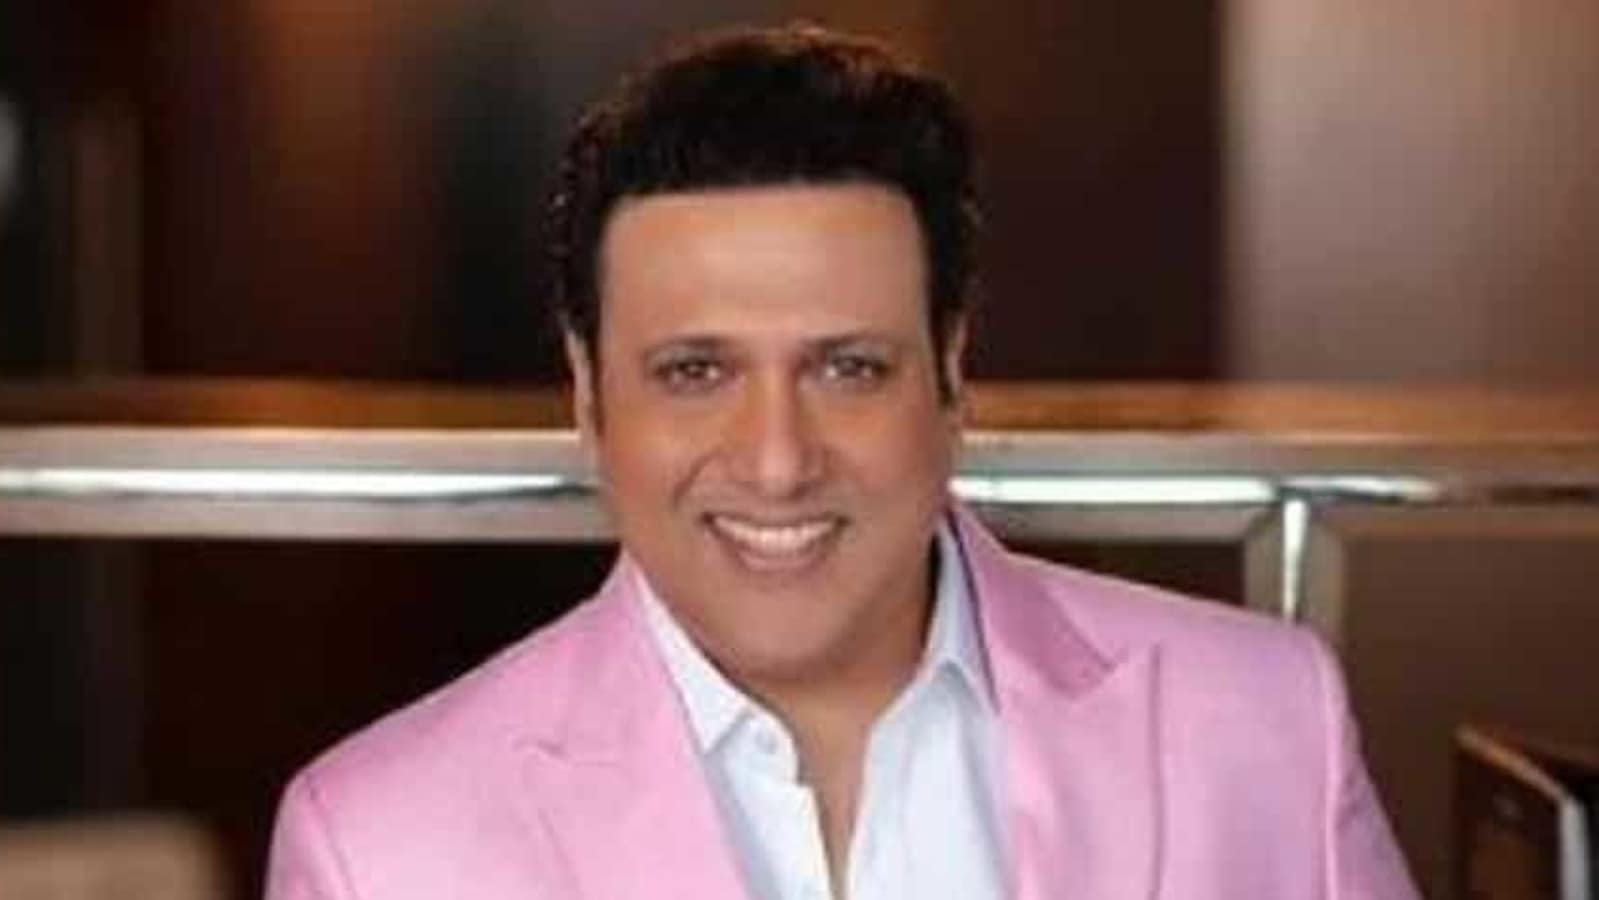 Govinda Ki Sex Video - Govinda says he's no longer 'pious', has been corrupted: 'Now I party,  smoke, drink' | Bollywood - Hindustan Times